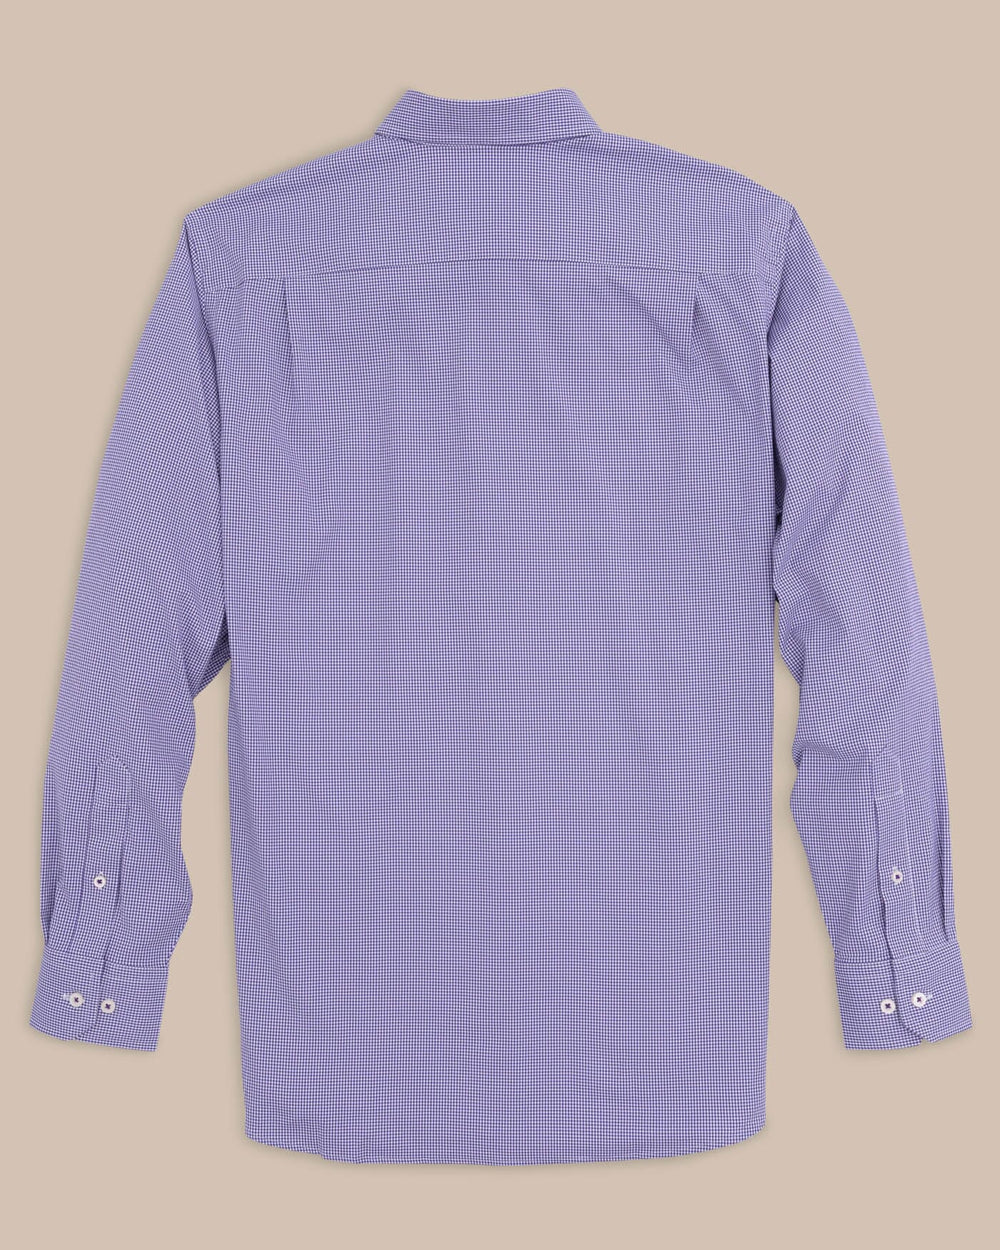 The back view of the Southern Tide Team Colors Gingham Intercoastal Sport Shirt by Southern Tide - Regal Purple